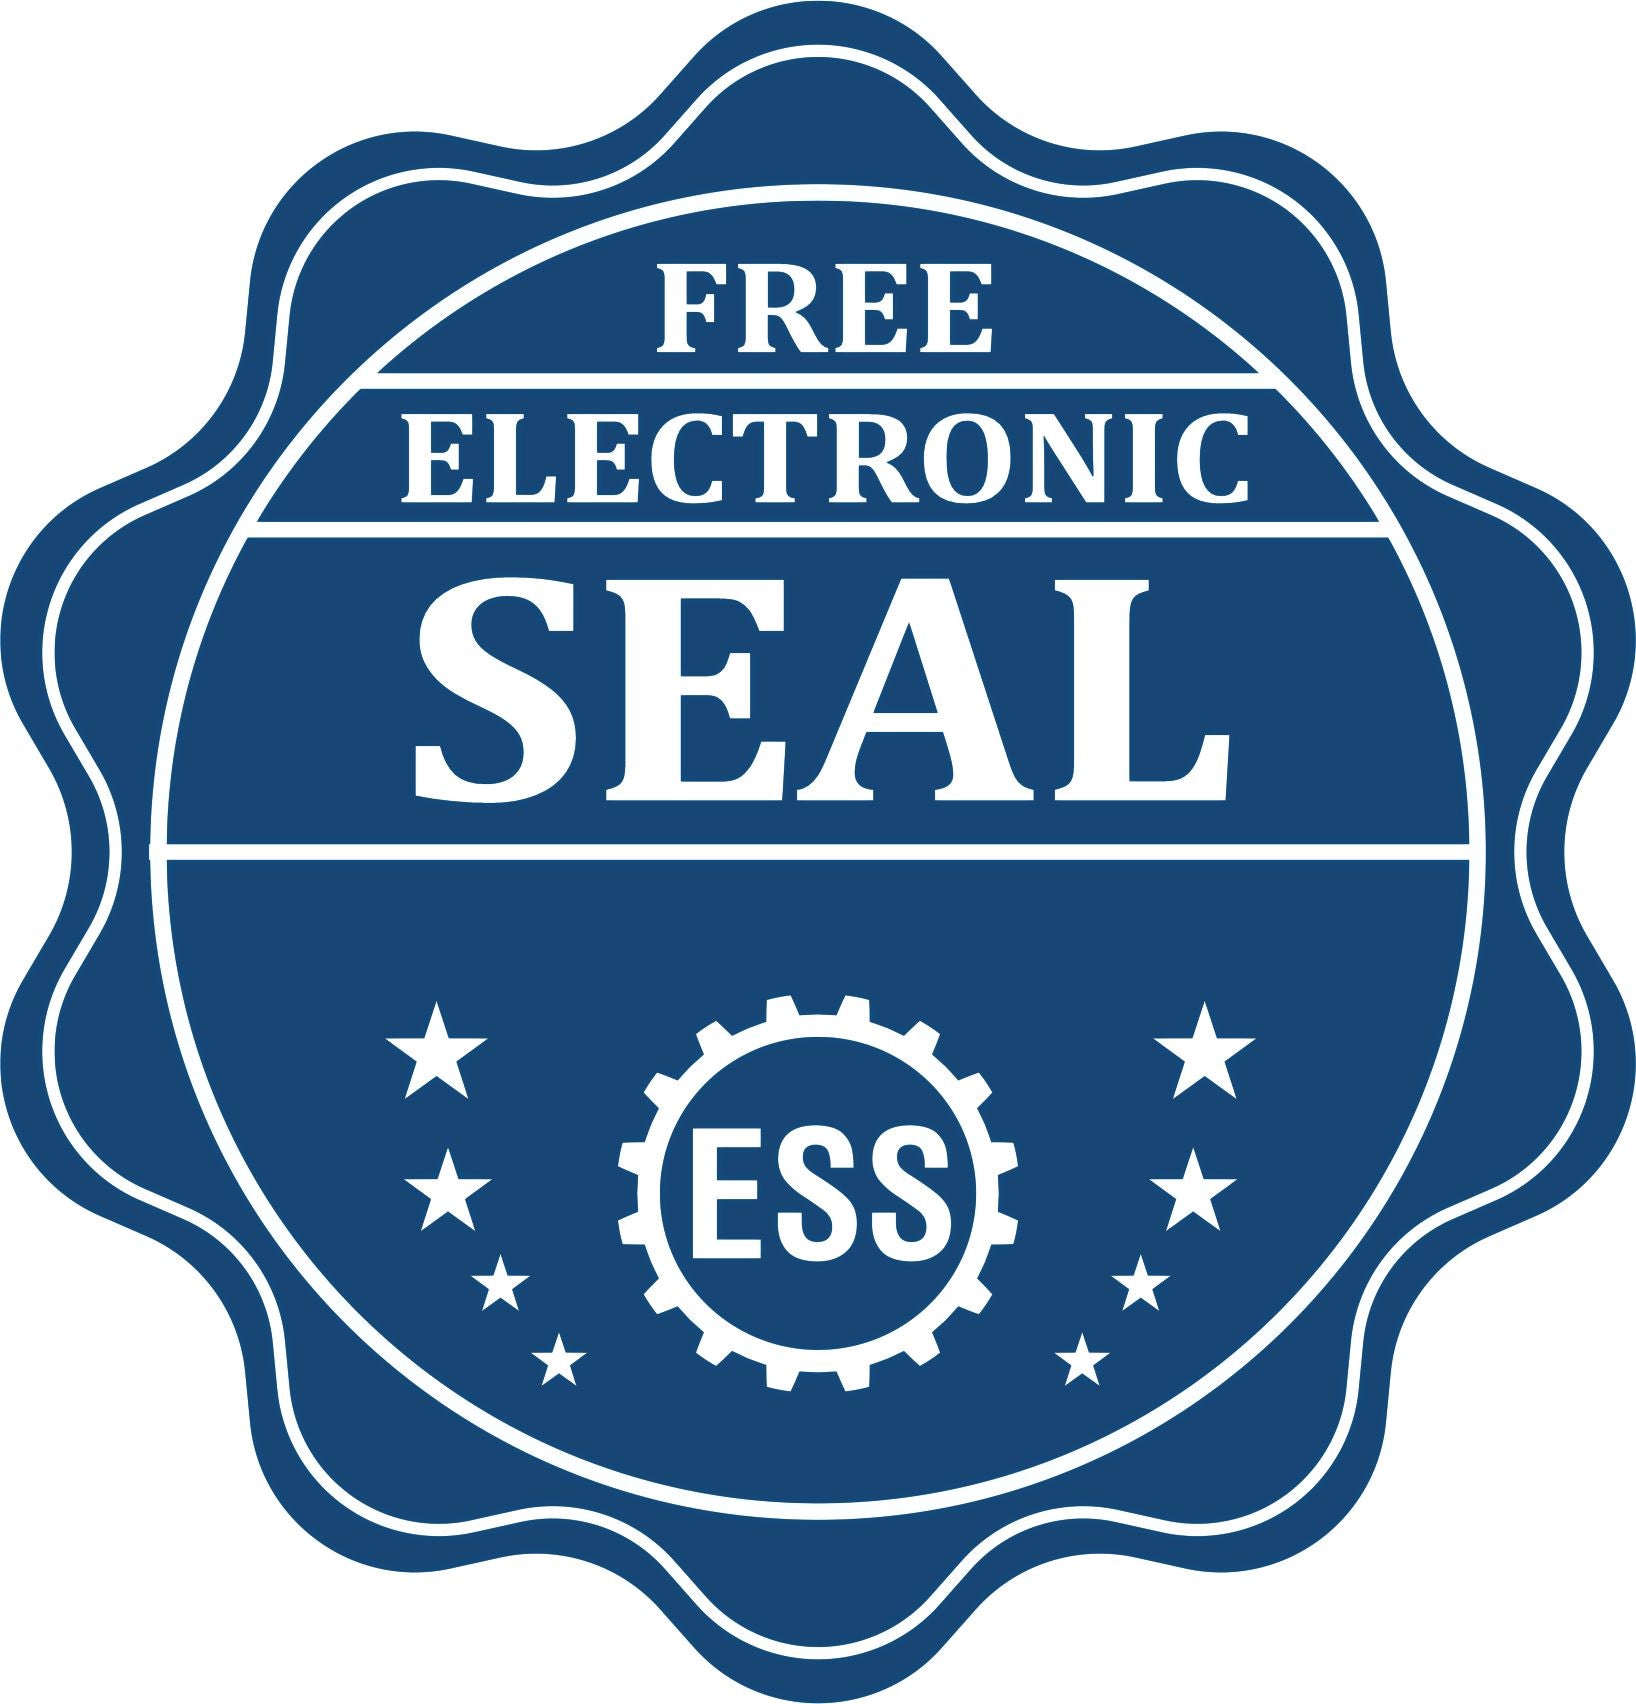 A badge showing a free electronic seal for the Heavy Duty Cast Iron Massachusetts Land Surveyor Seal Embosser with stars and the ESS gear on the emblem.